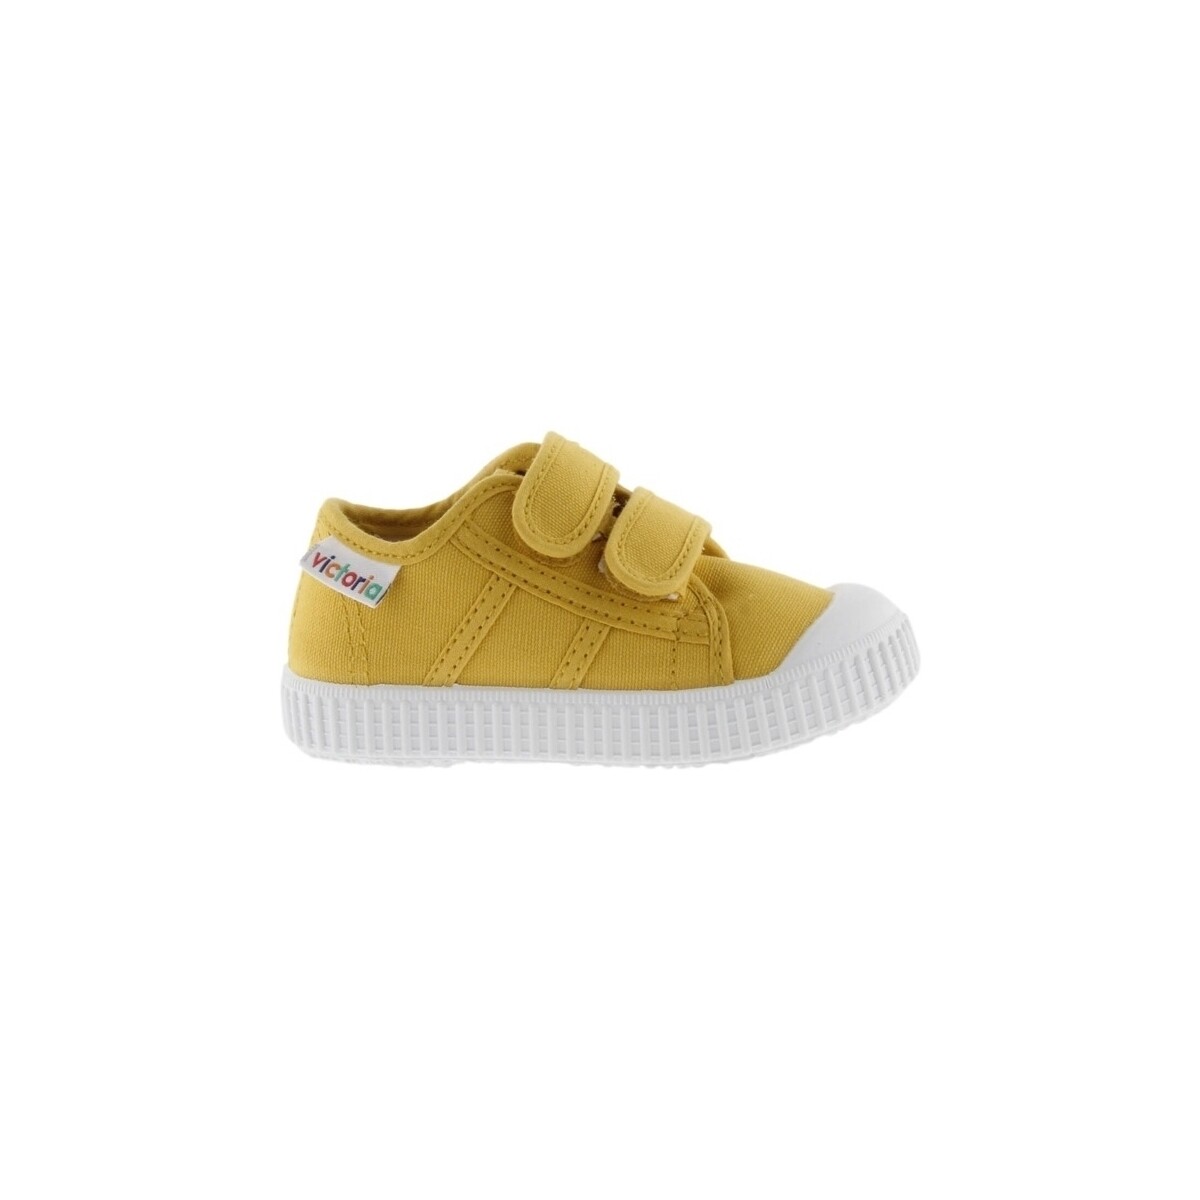 Victoria  Sneakers Victoria Baby 36606 - Curry